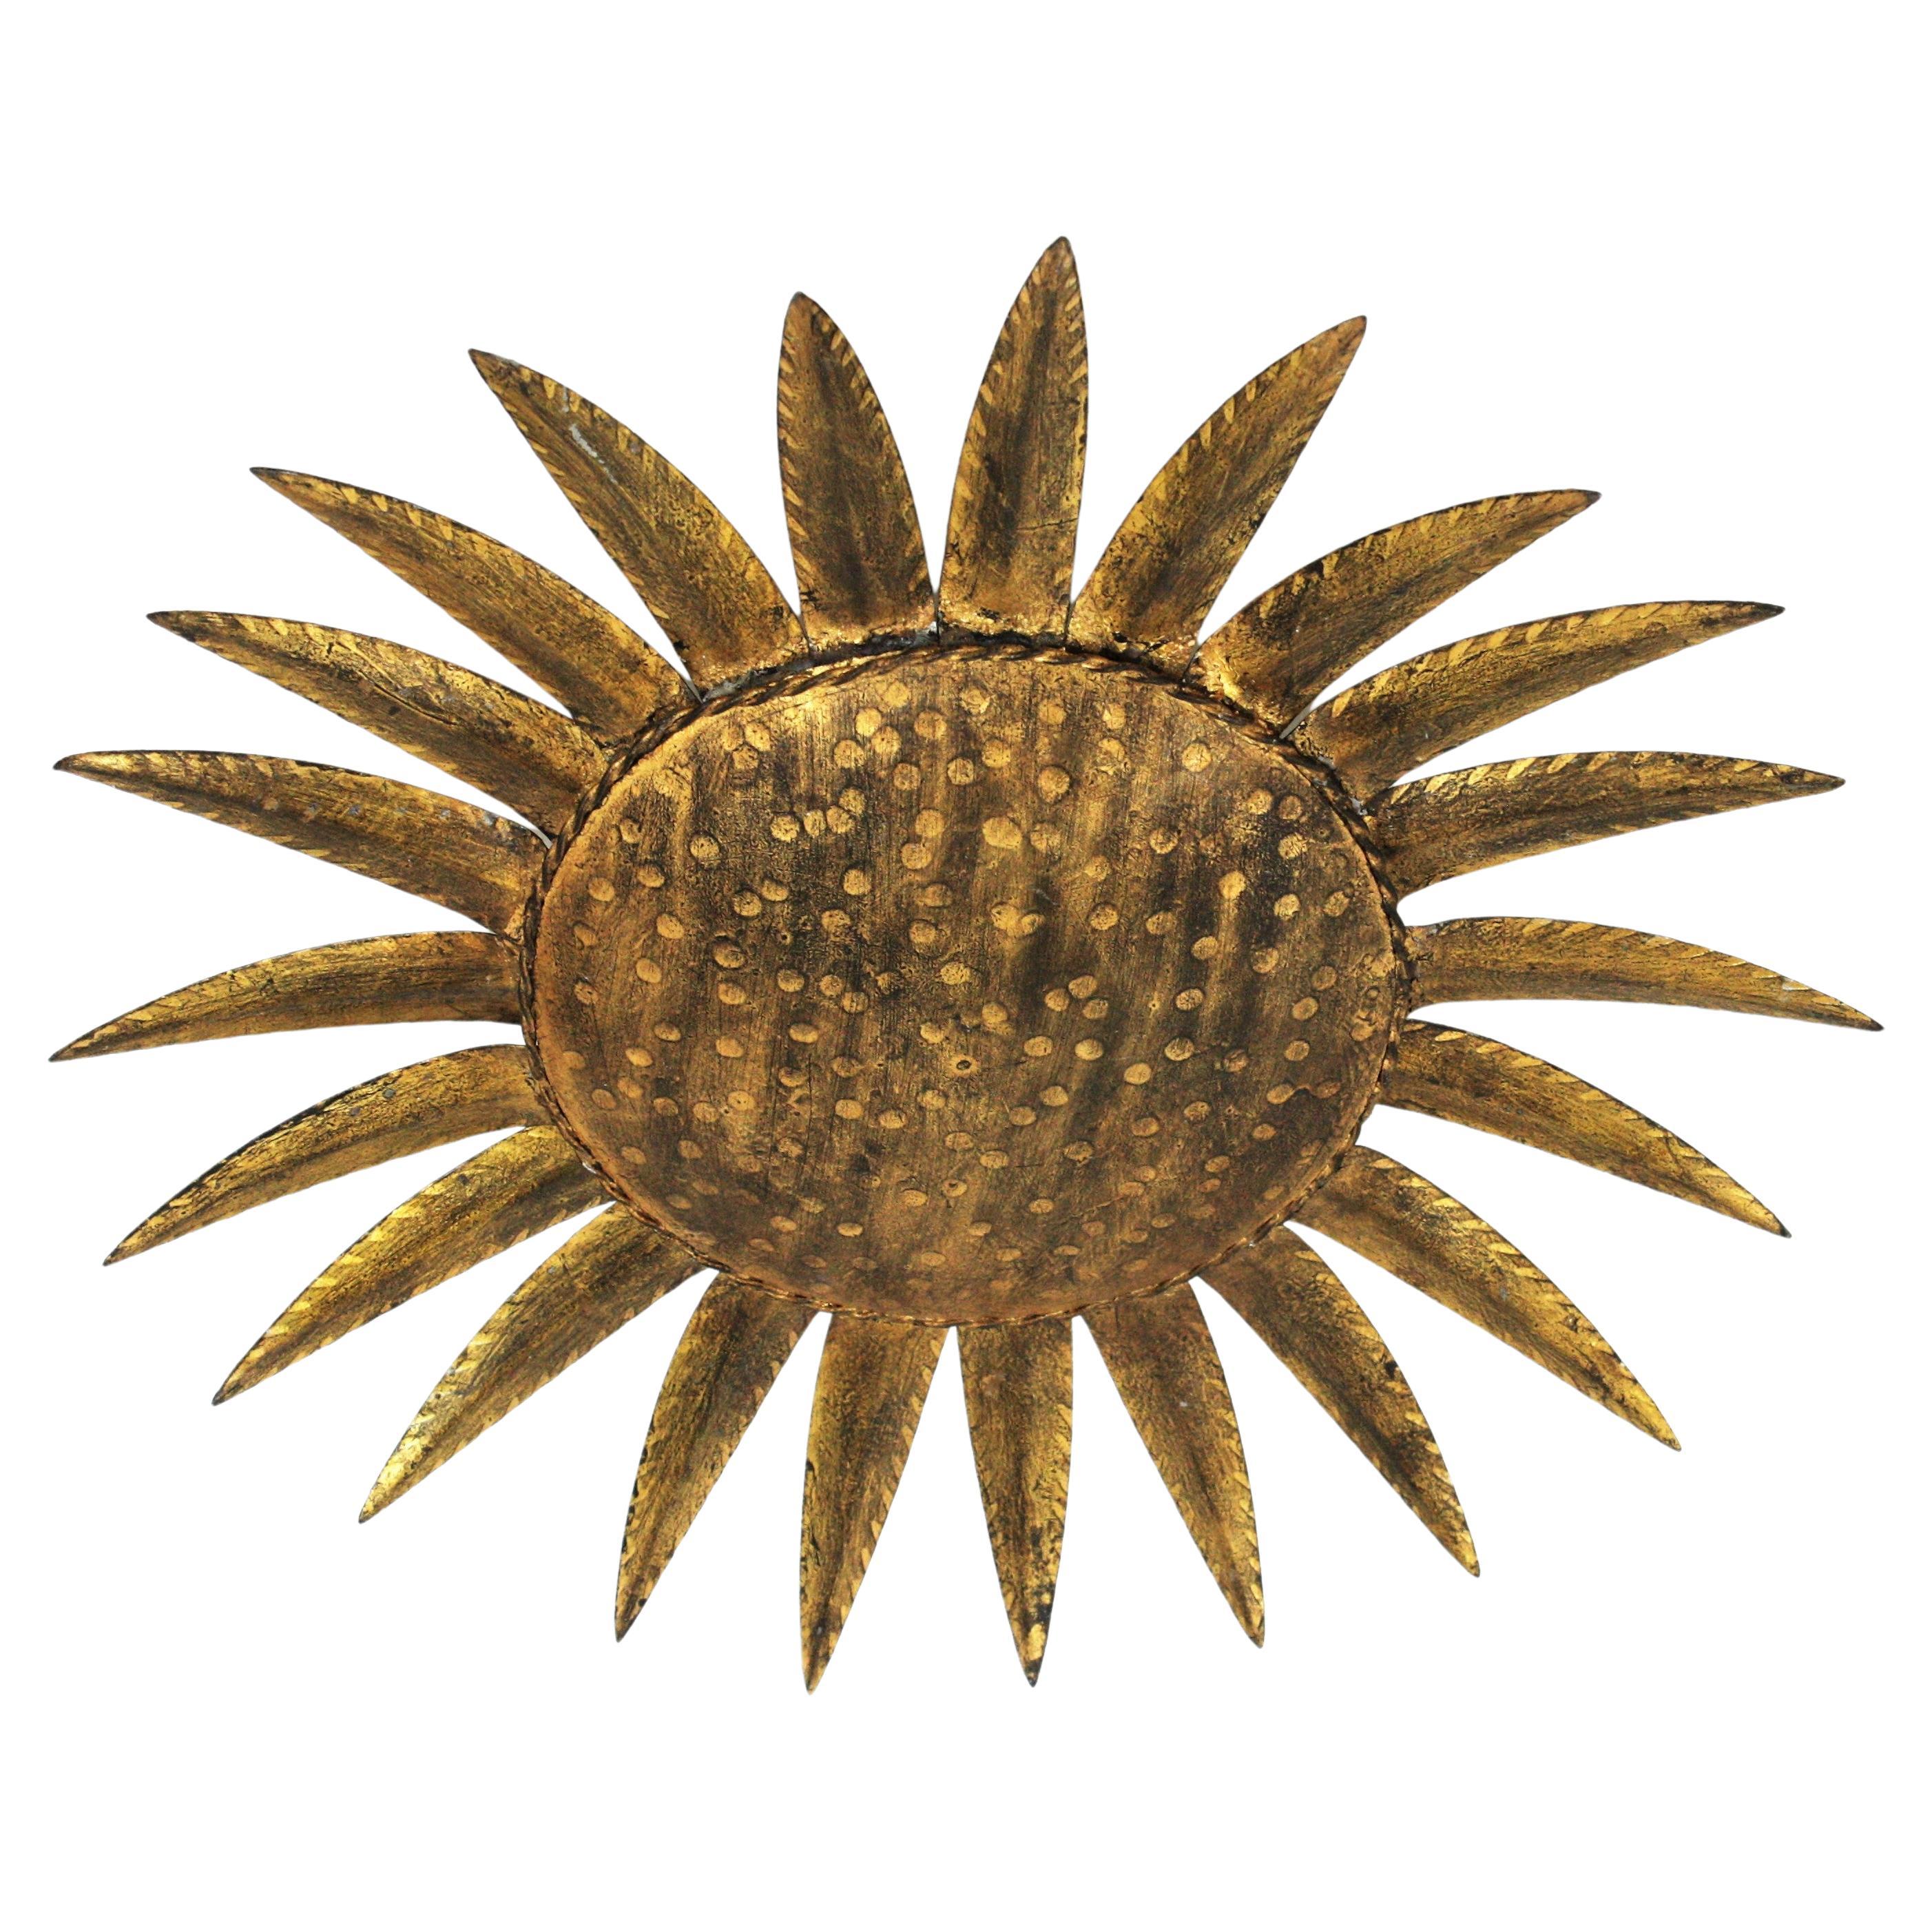 Eye-catching gilt wrought iron sunburst ceiling flush mount in the style of Brutalism. Manufactured by Ferro Art, Spain, 1950s.
Heavily adorned by the hammer marks, It has a terrific aged patina showing its original gold leaf gilding.
This